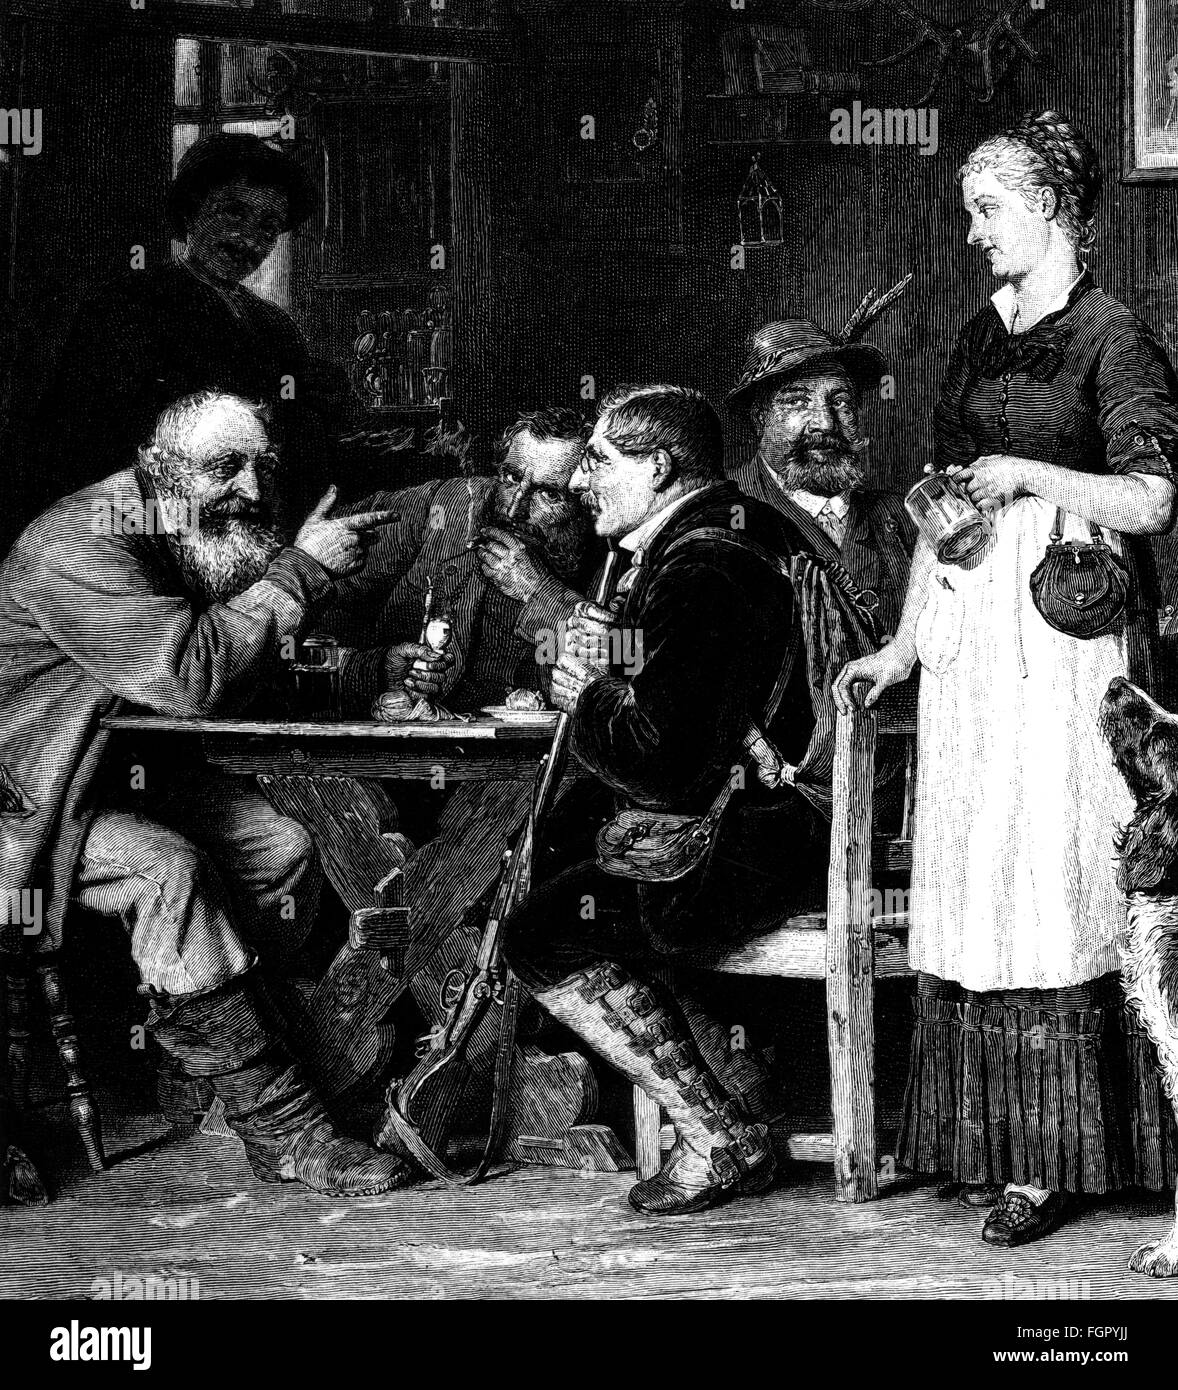 gastronomy, inns, hunting party at the inn, after painting 'Der Sonntagsjäger' (The Sunday hunter), by Eduard von Grützner (1846 - 1925), wood engraving, circa 1880, Additional-Rights-Clearences-Not Available Stock Photo